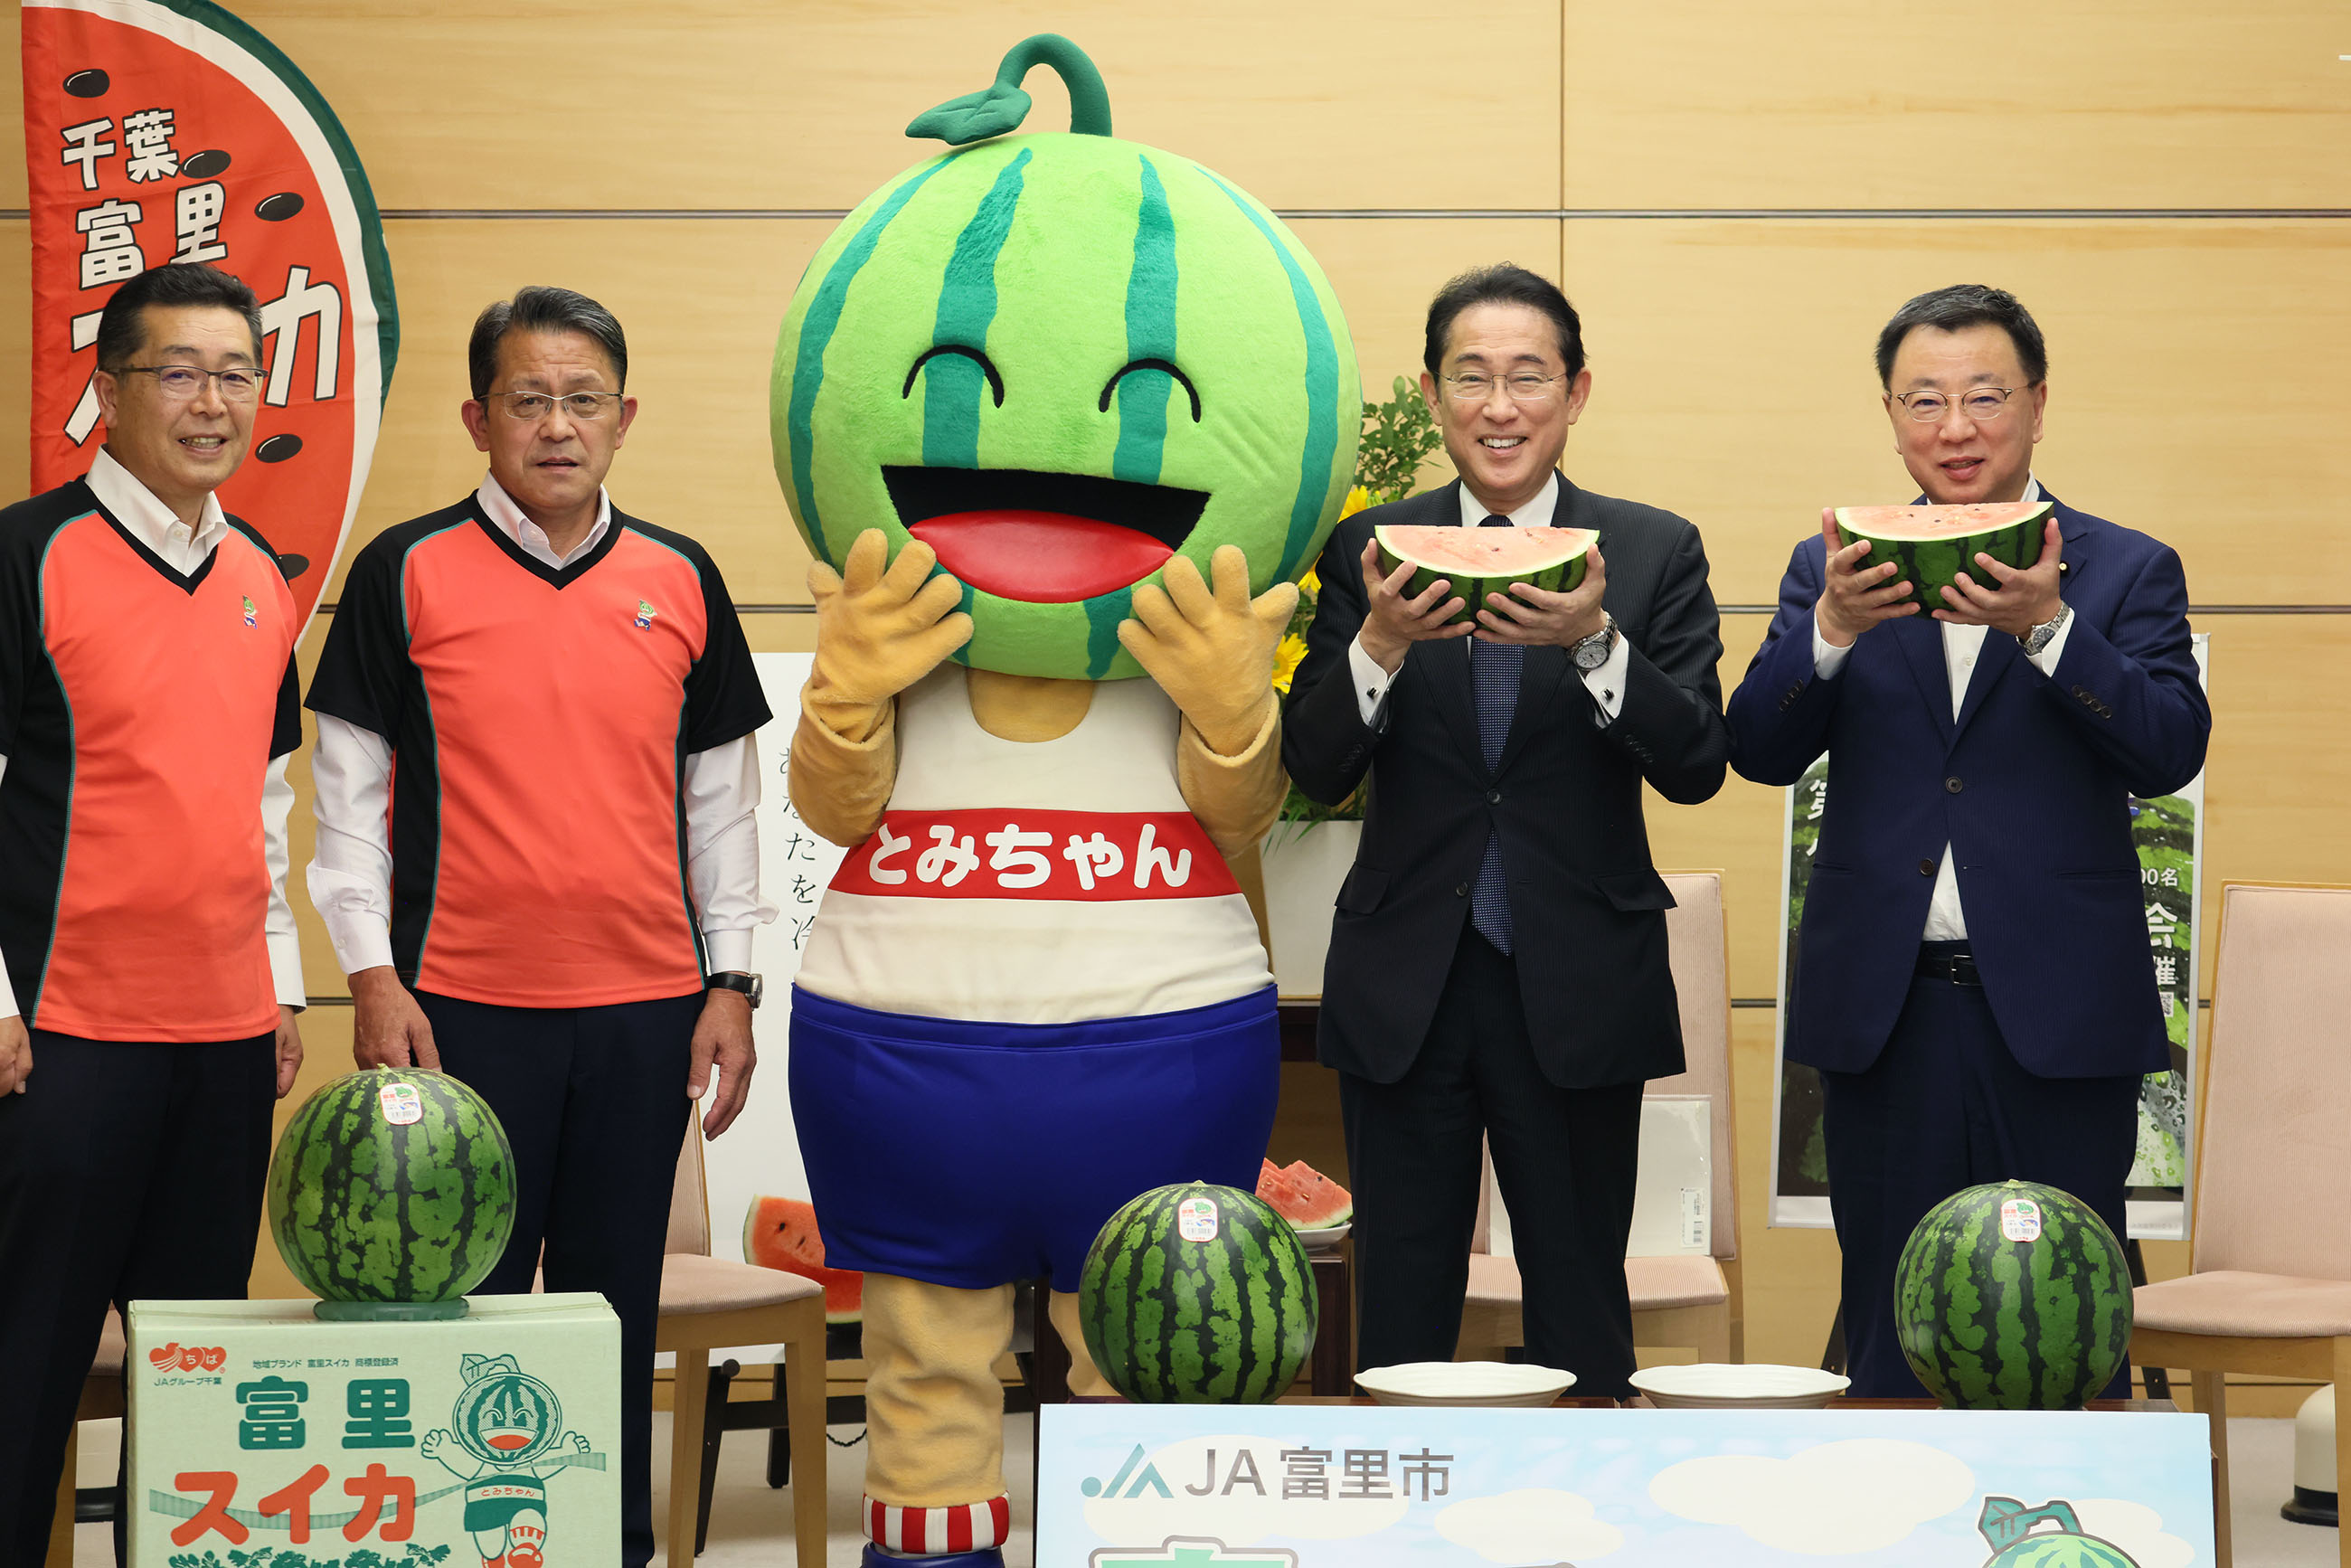 Presentation of Tomisato Watermelon by Delegation from Tomisato City, Chiba Prefecture